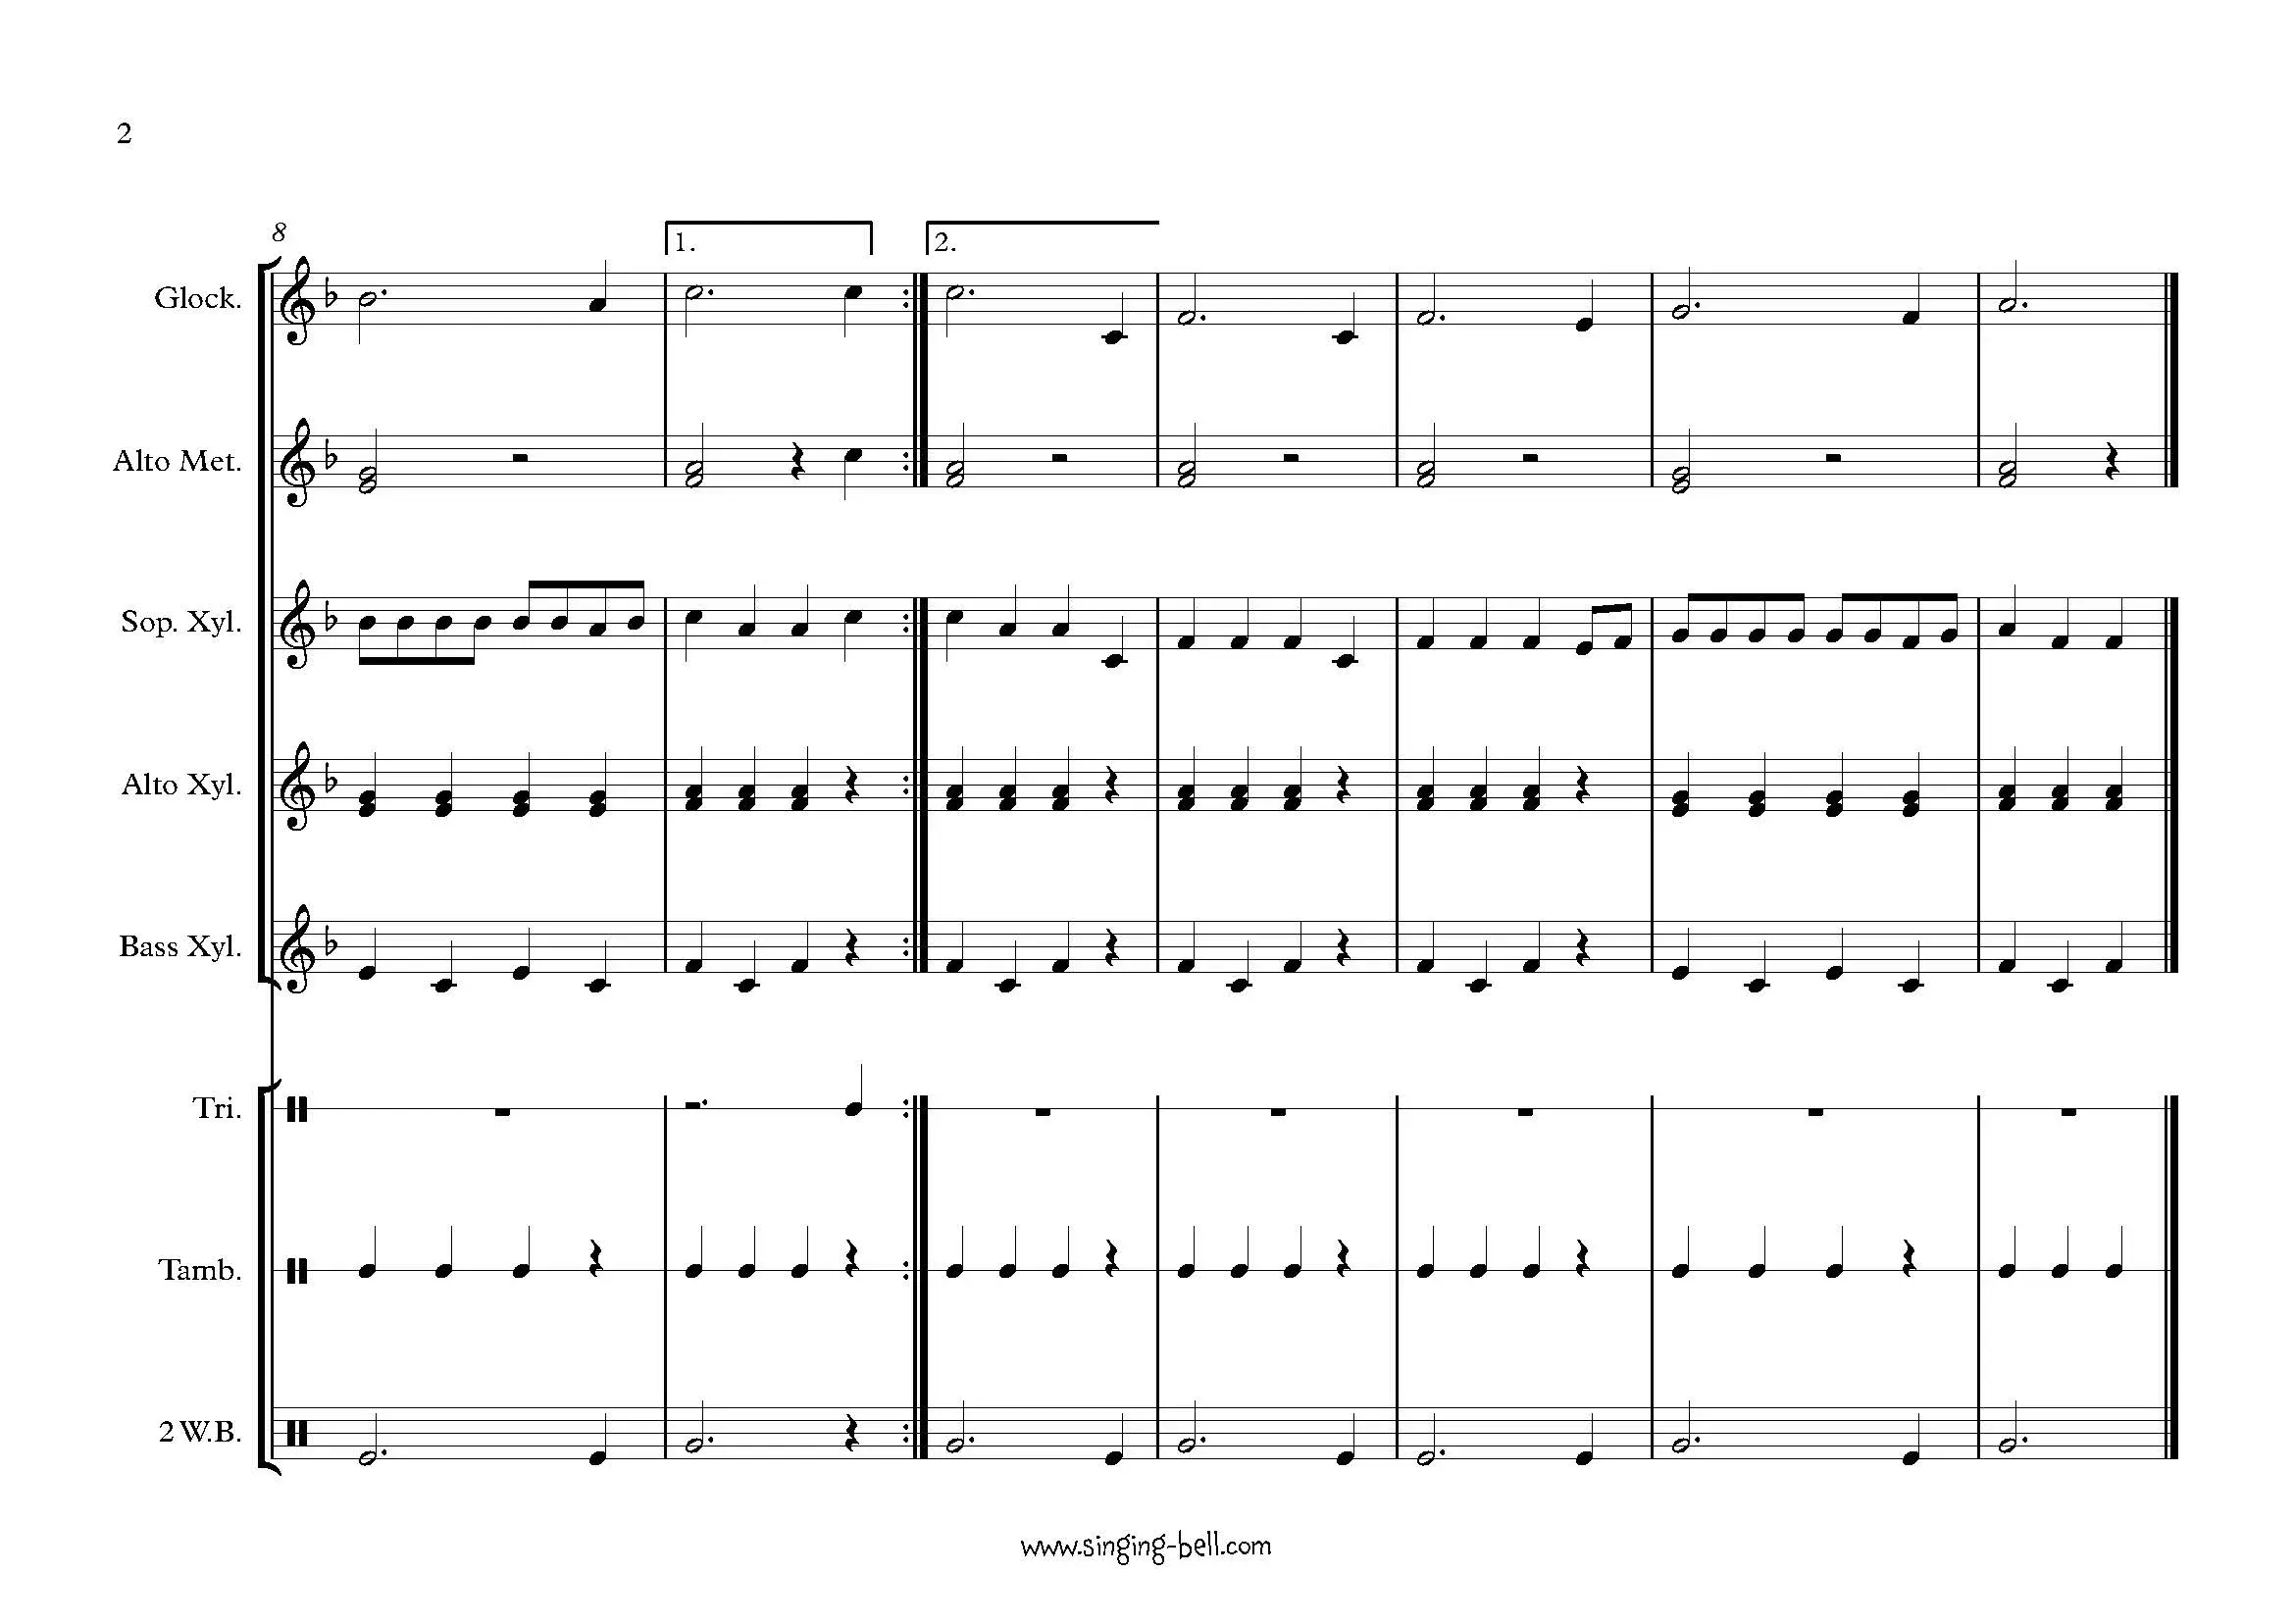 A-Ram-Sam-Sam-percussion-Orff-sheet-music-singing-bell_Page_2